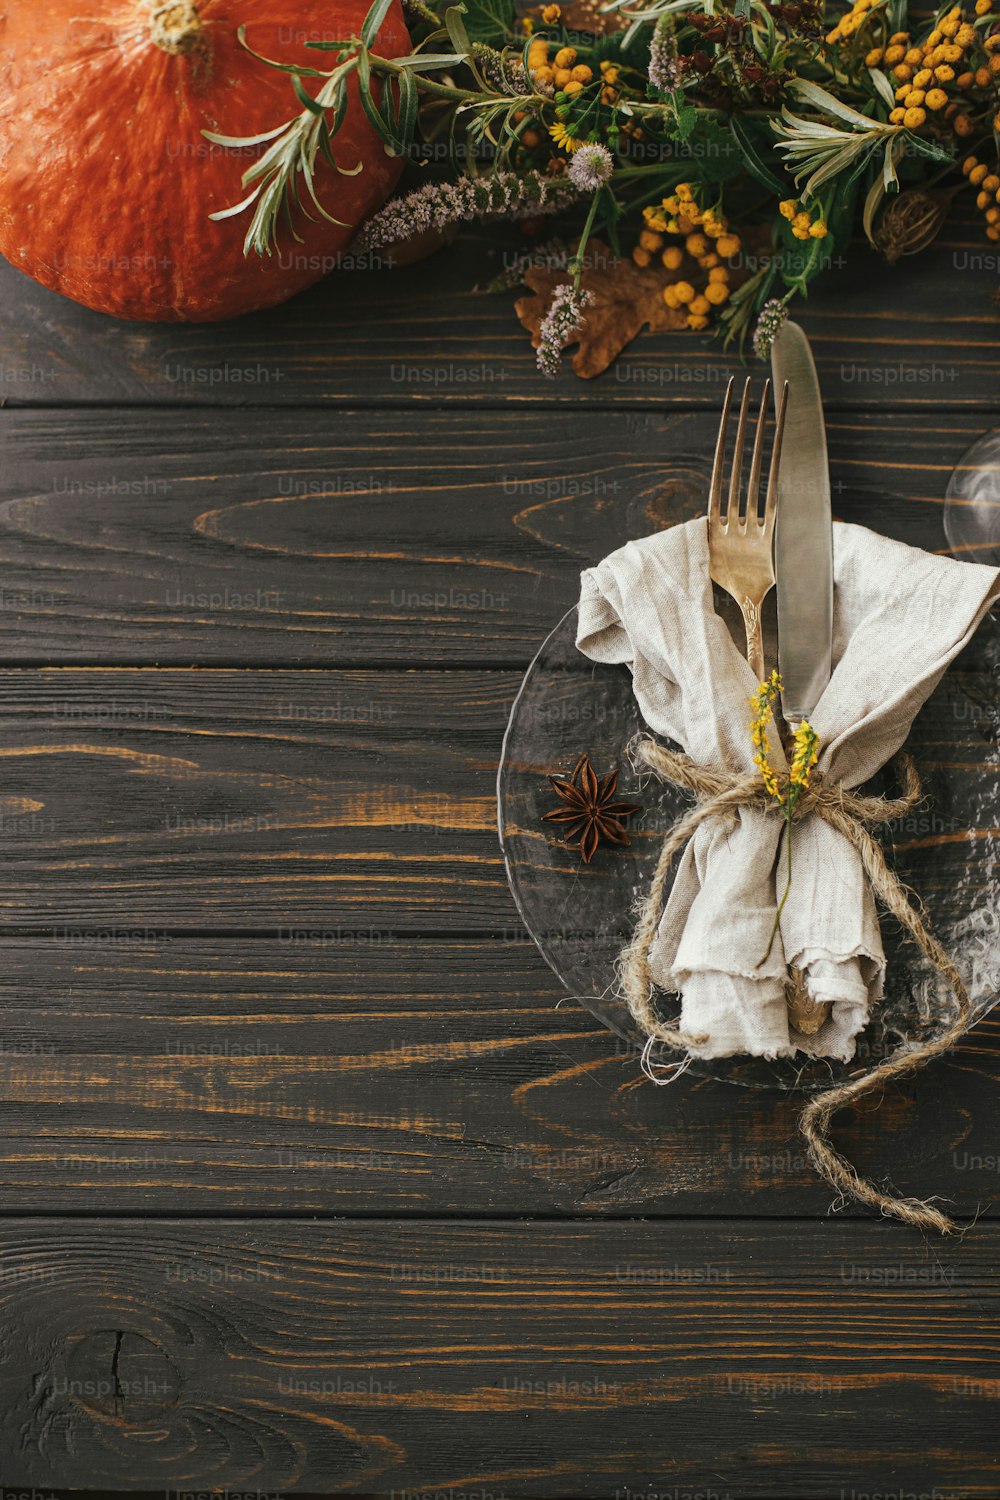 Modern plate with vintage cutlery, linen napkin, herb on wooden table with pumpkins and autumn flowers arrangement. Rustic farmhouse wedding. Thanksgiving dinner table setting